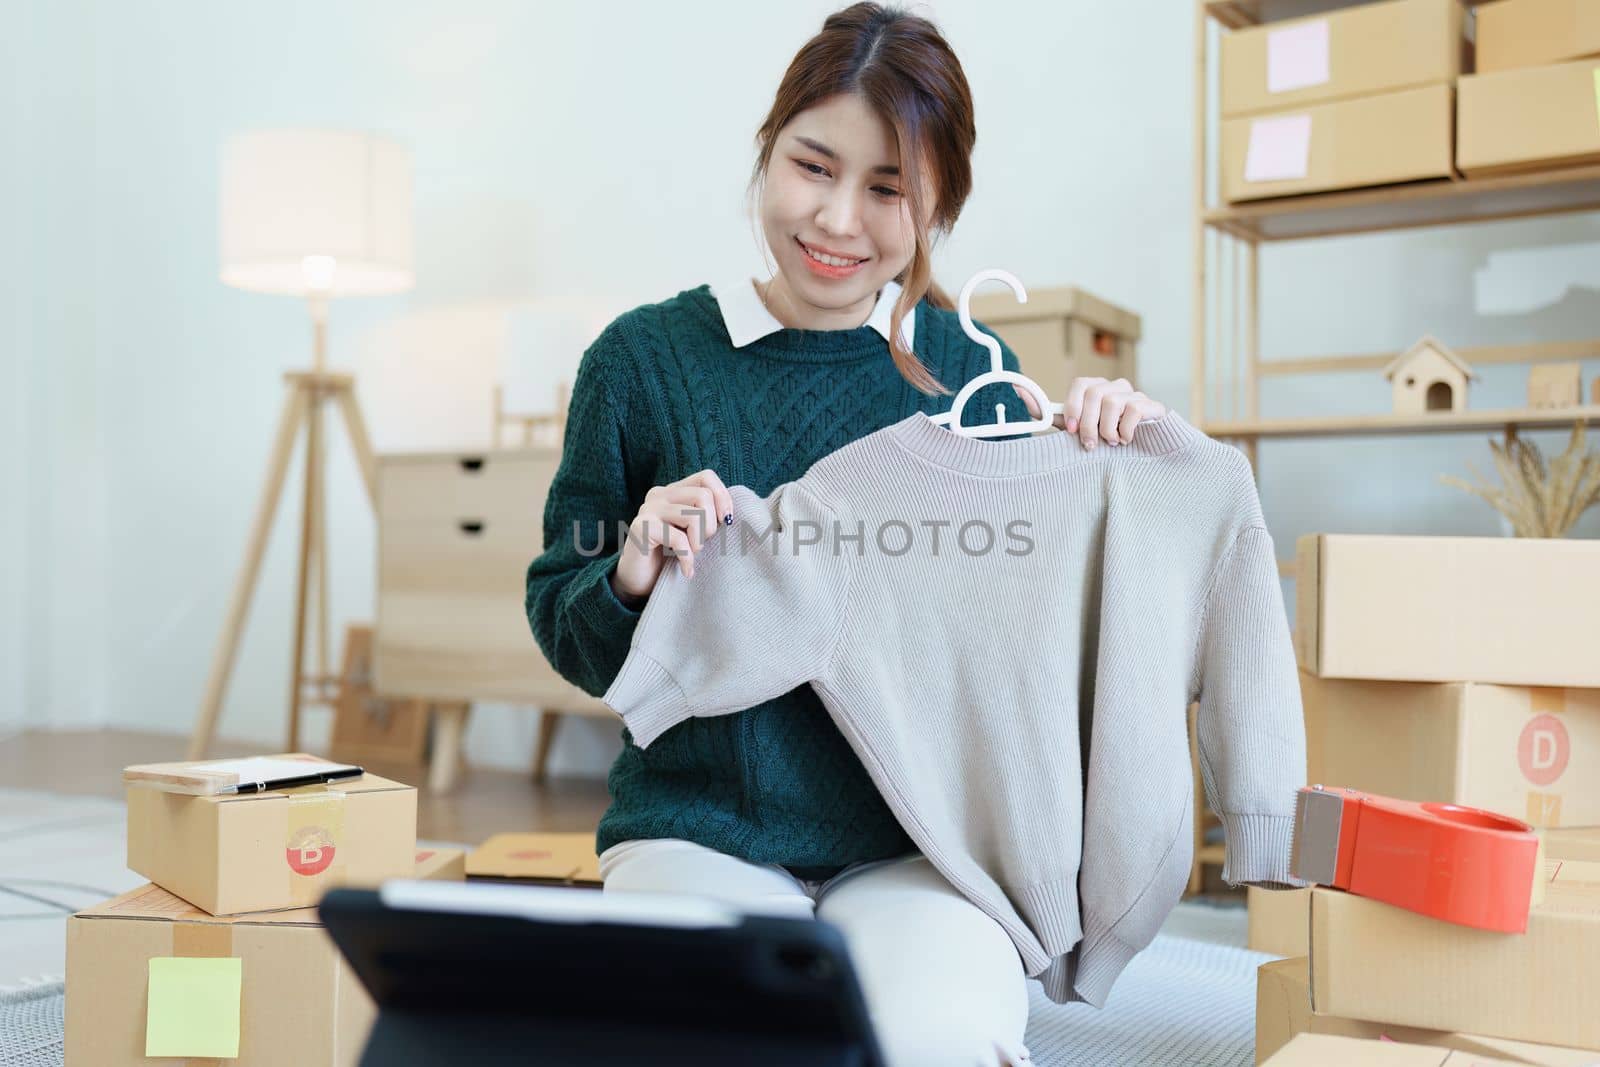 Starting small business entrepreneur of independent young Asian woman online seller using a tablet computer showing products to a customer before making a purchase decision. SME delivery concept.